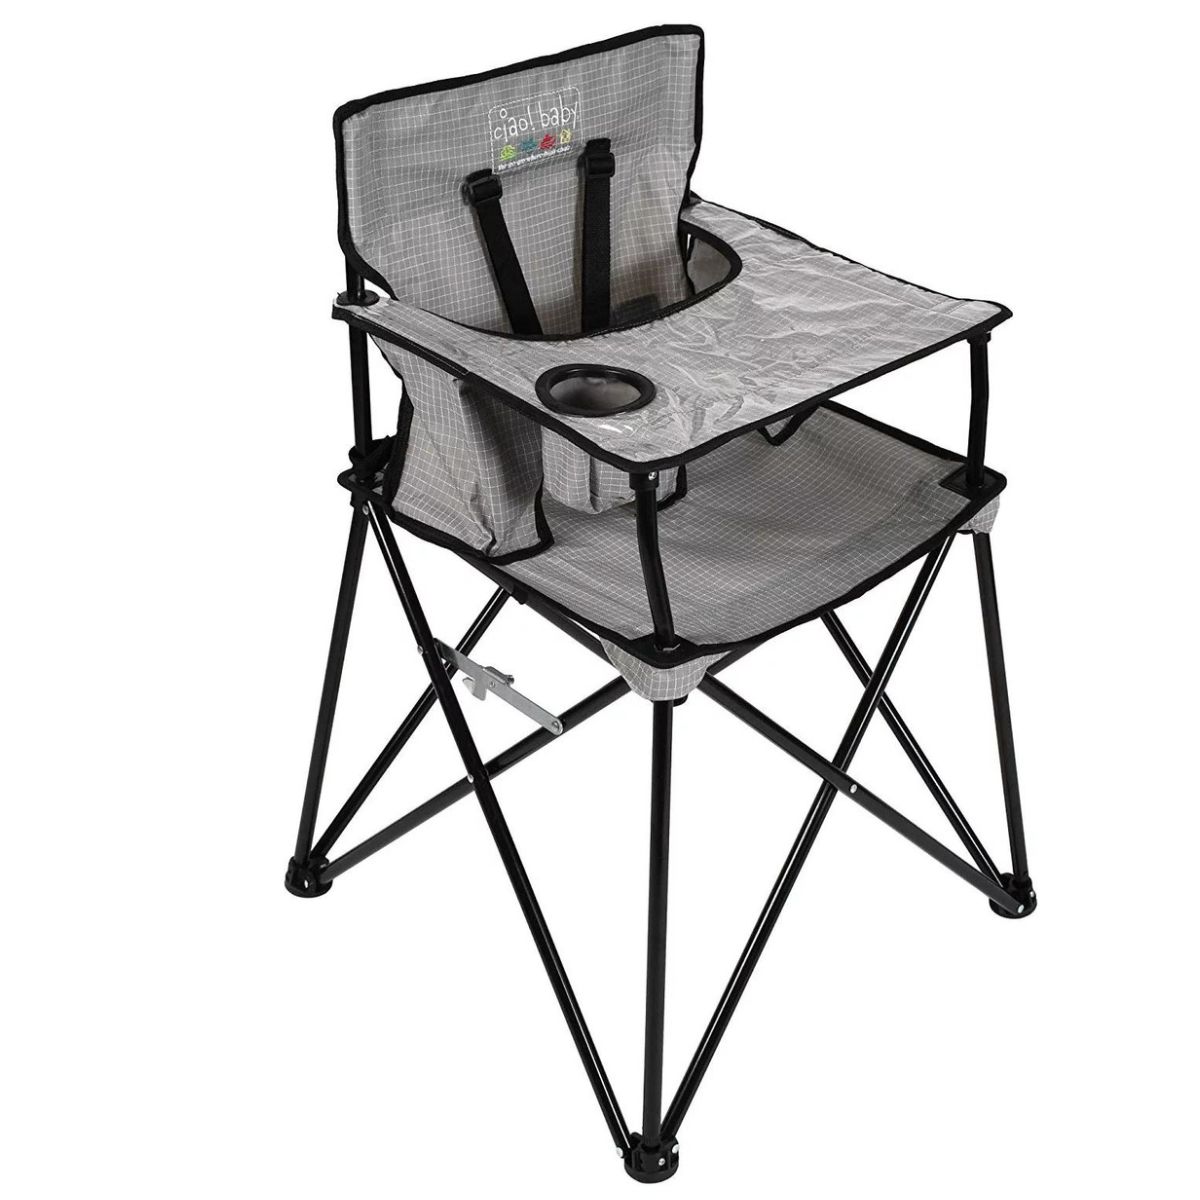 Ciao baby portable highchair in gray 